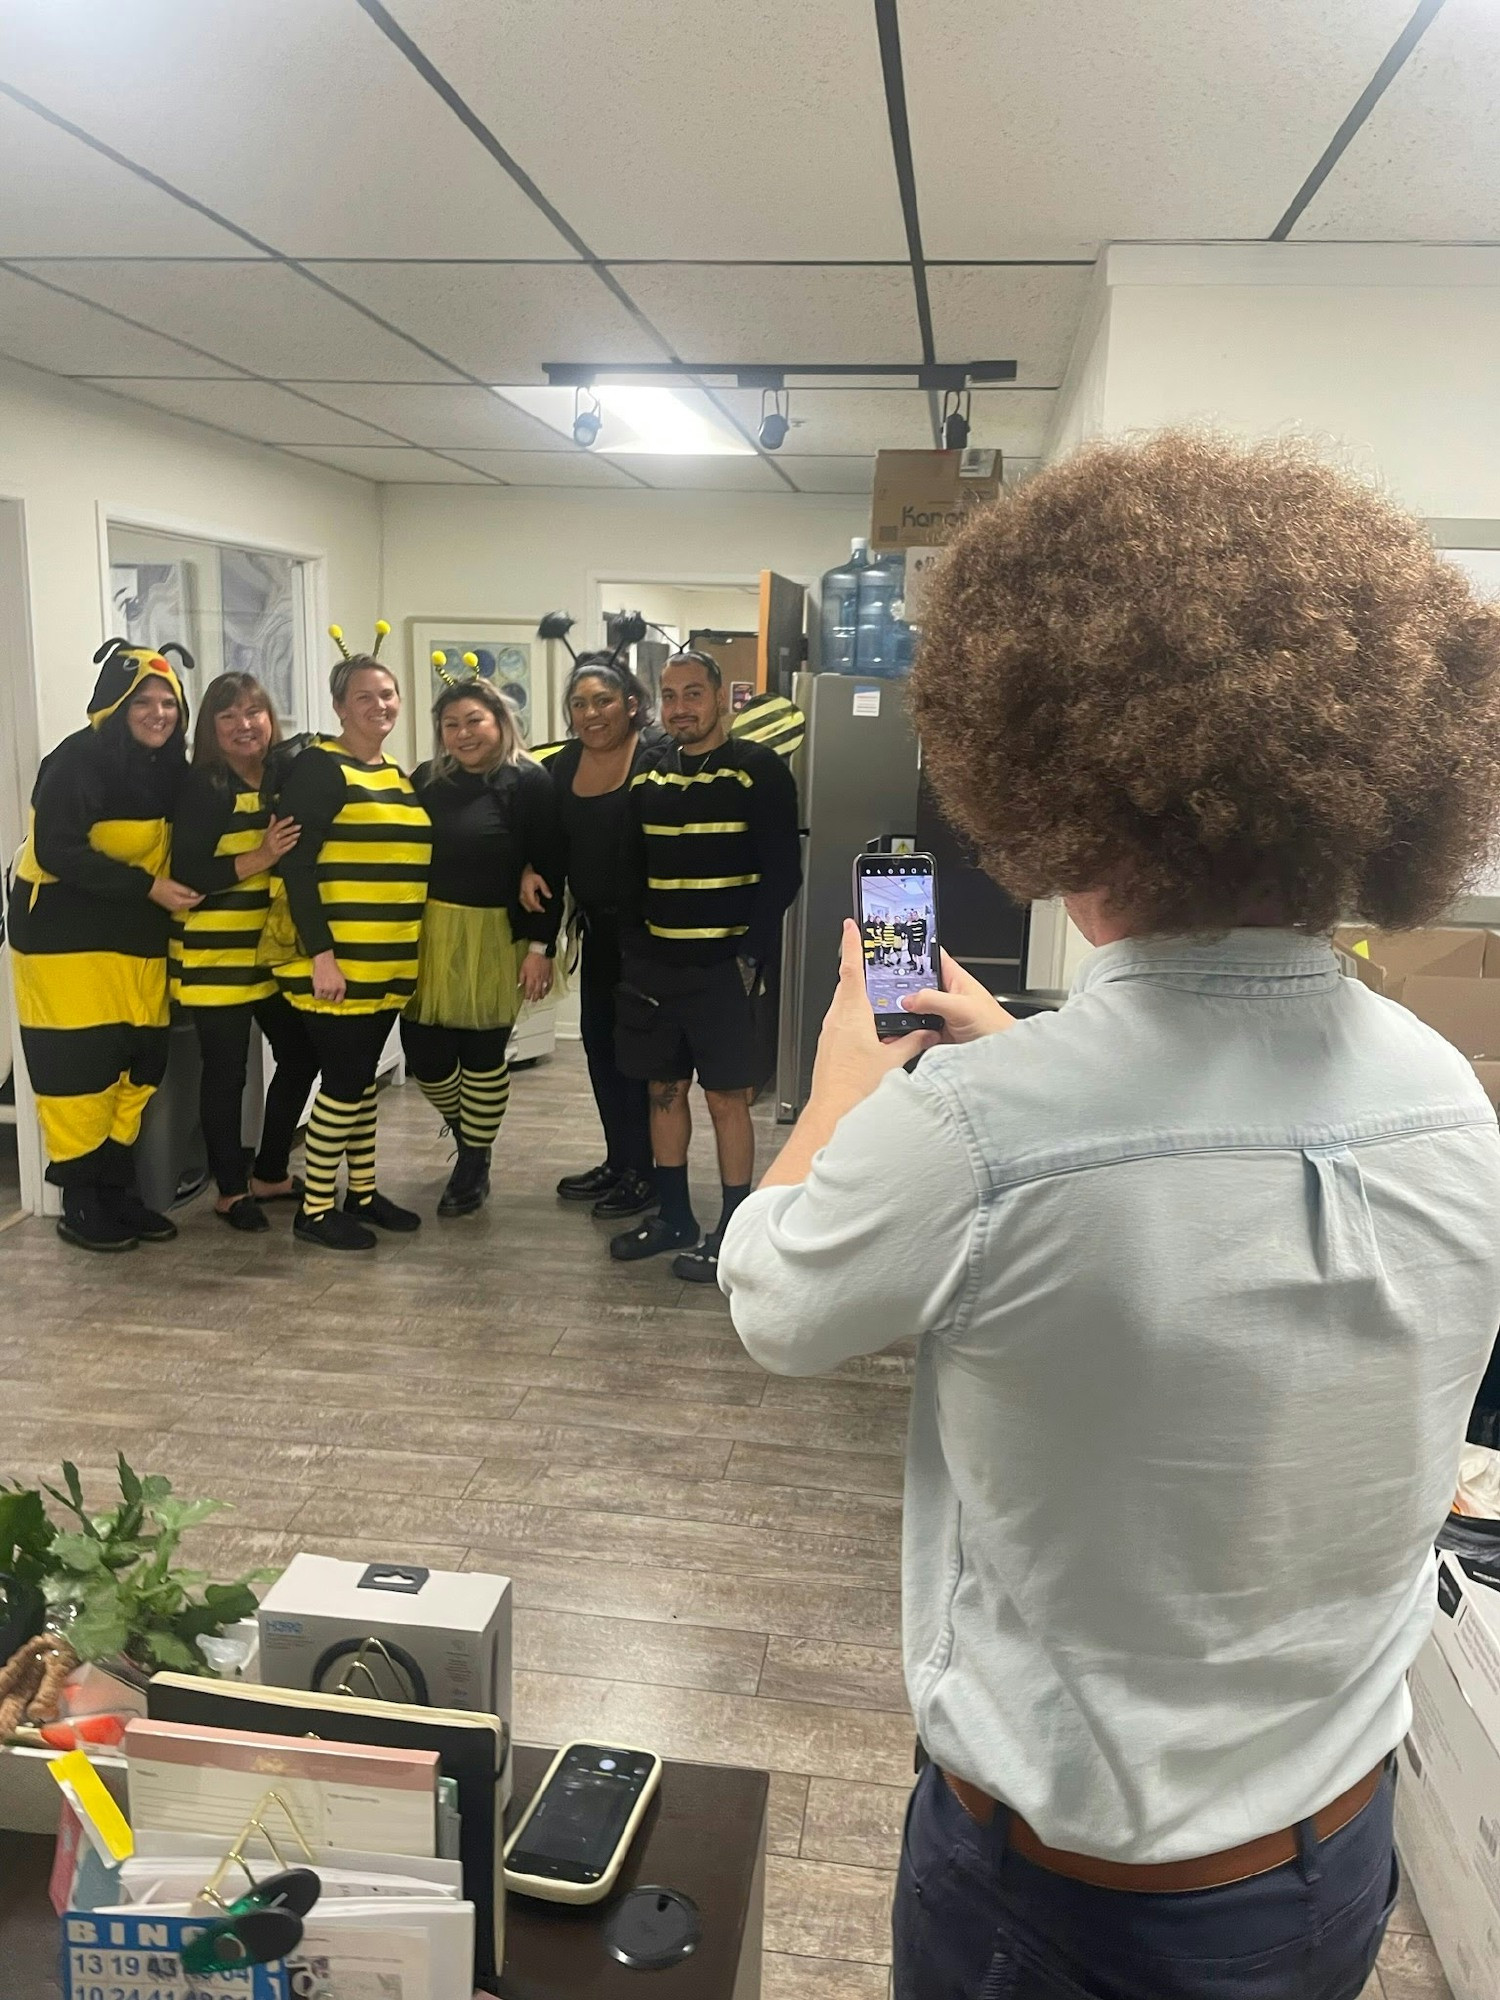 Bob Ross and the Busy Bees celebrating Halloween in Acacia's office.